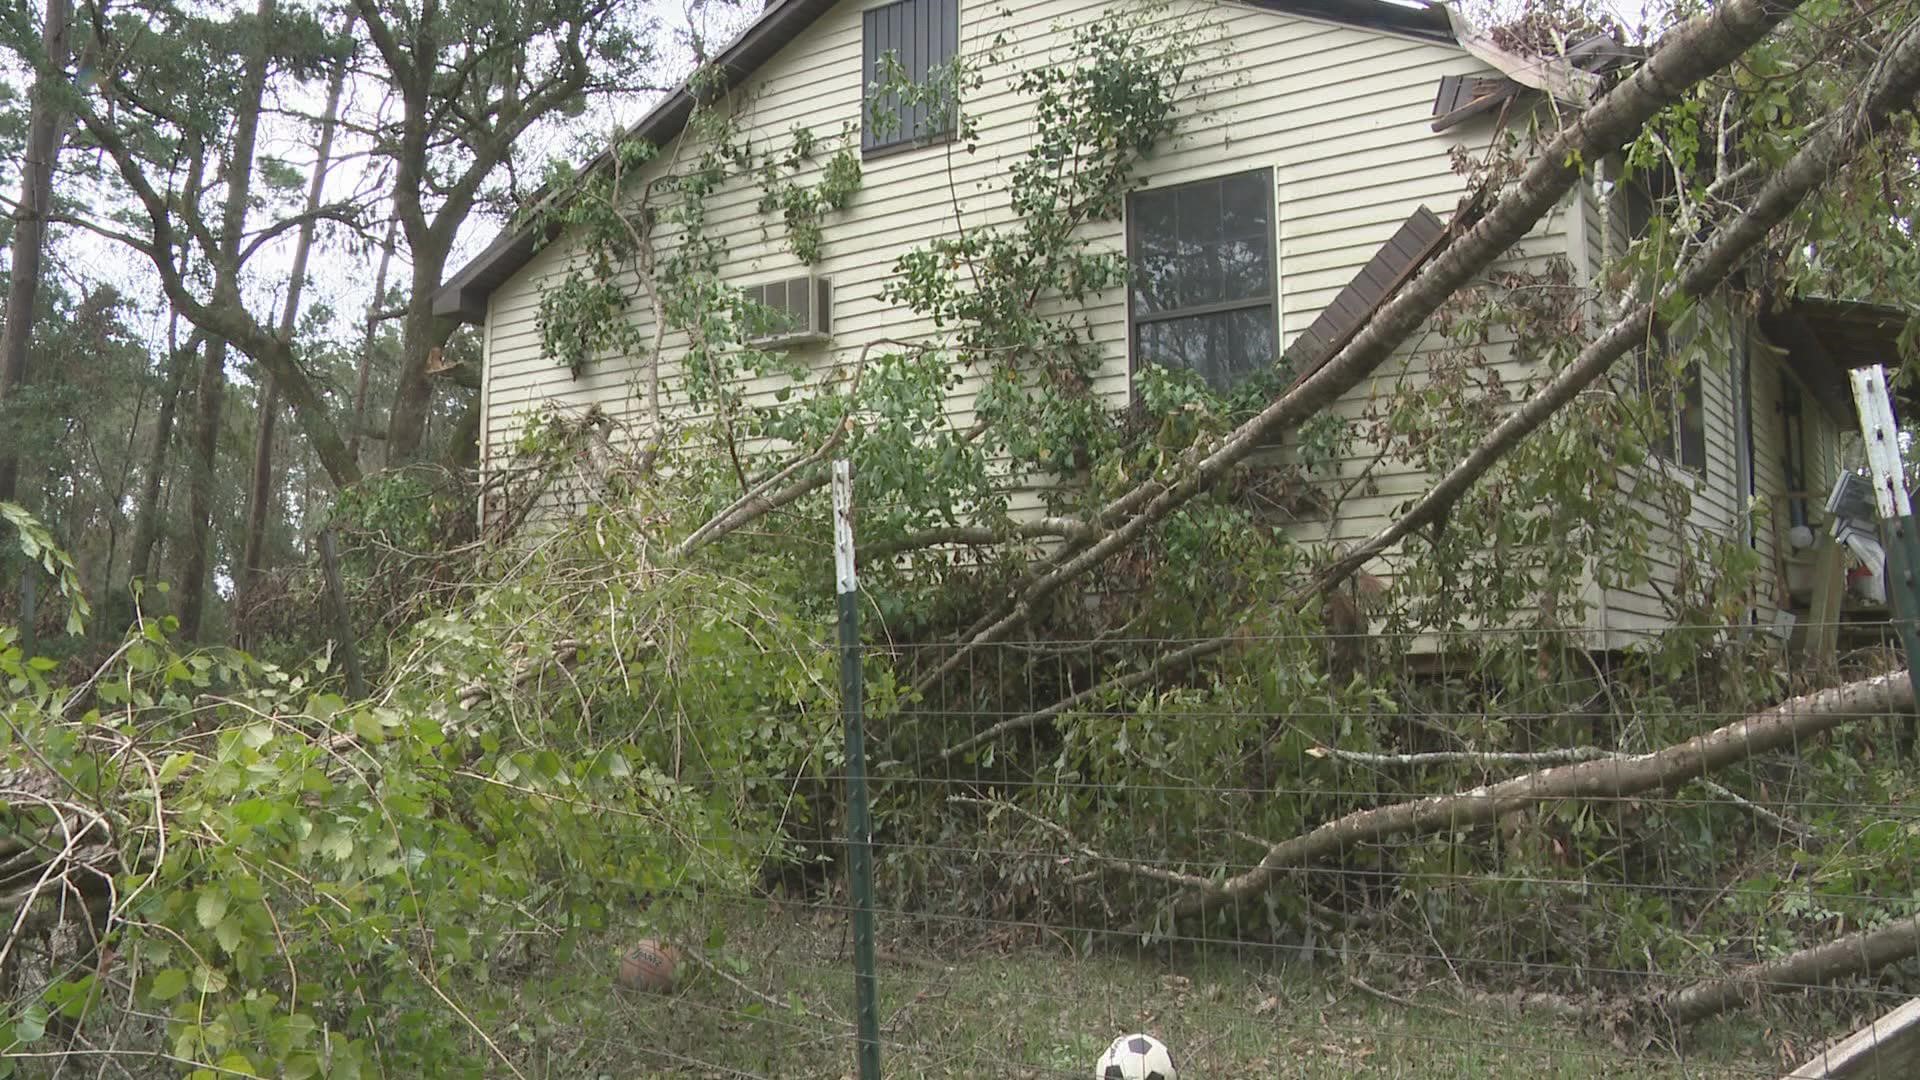 Huge trees still cover Sarah Hall's house and yard, and she's desperate to find anyone who can lend a hand.